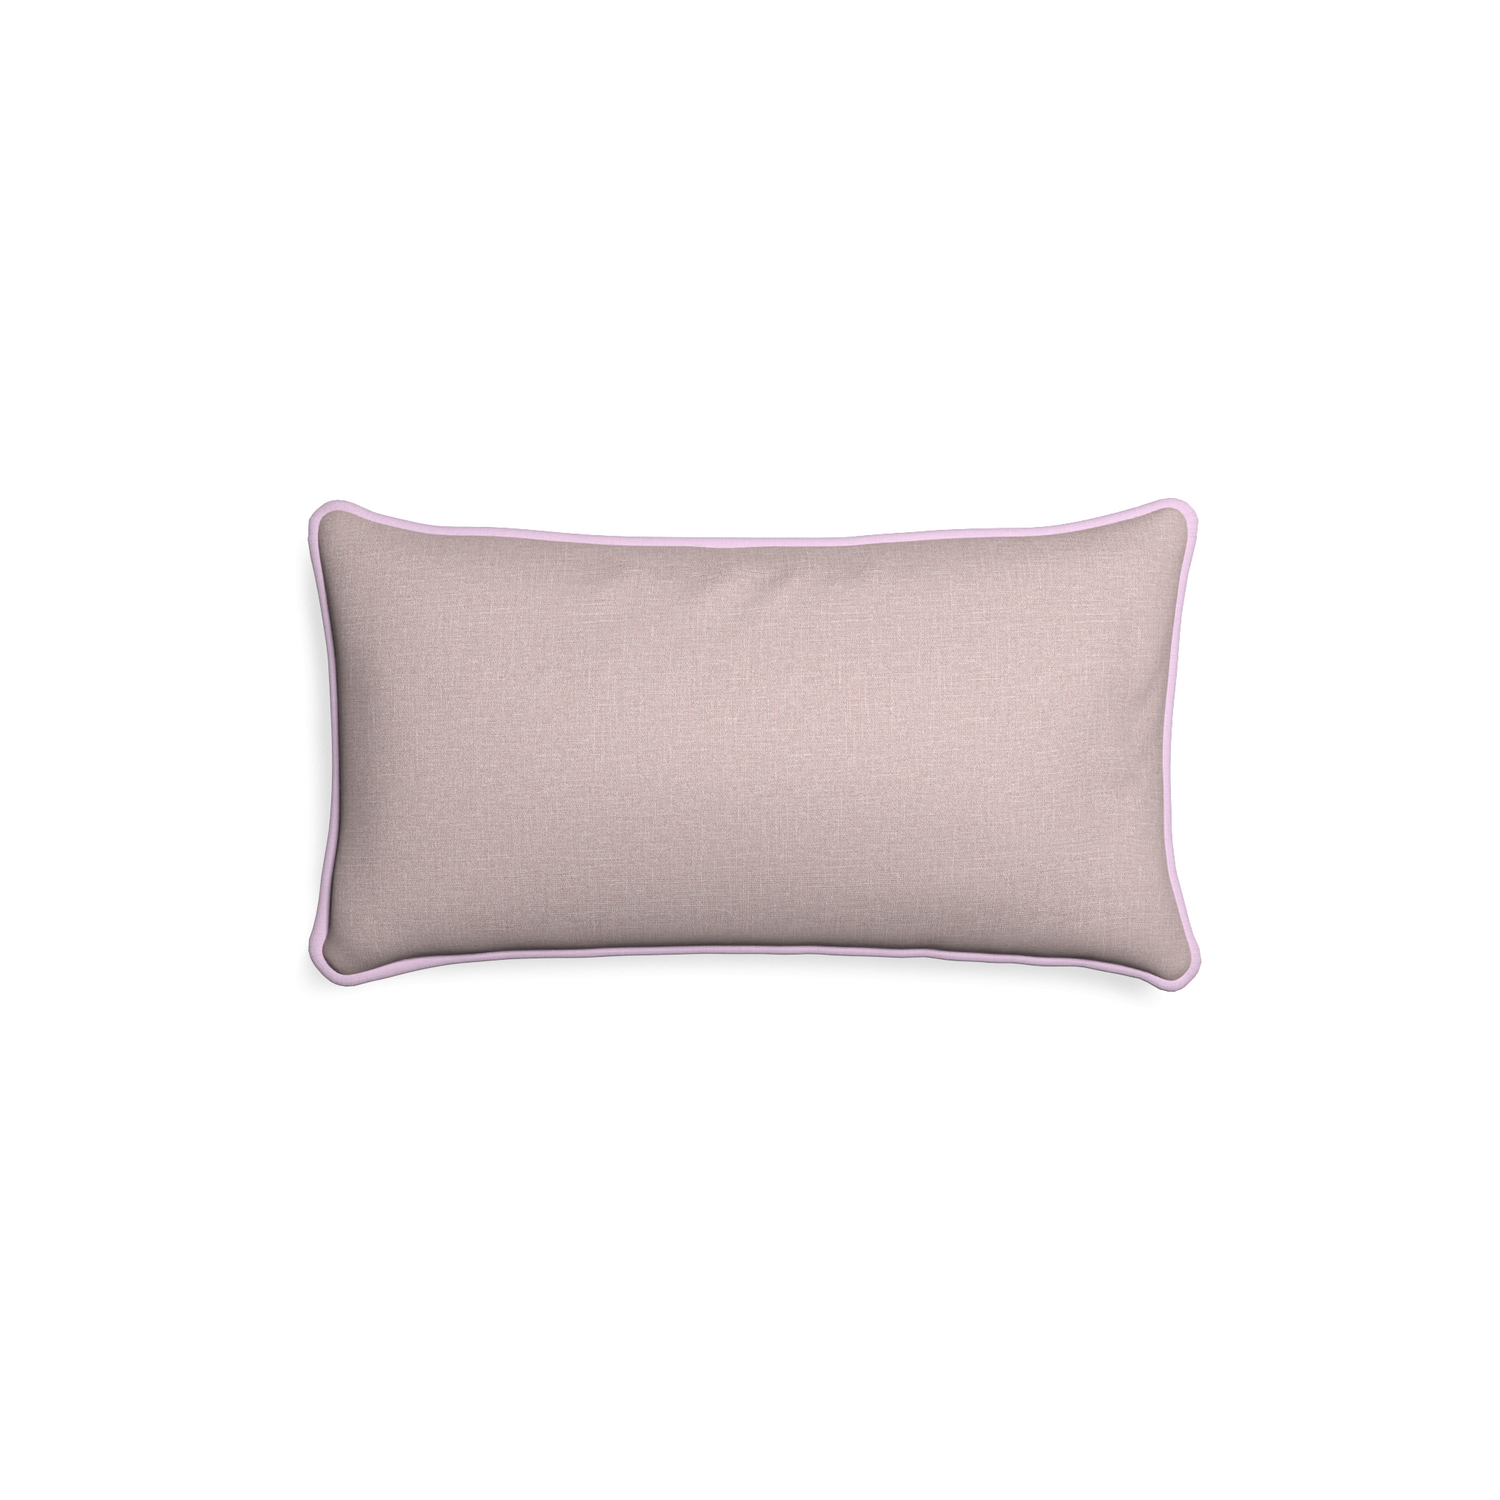 Petite-lumbar orchid custom mauve pinkpillow with l piping on white background